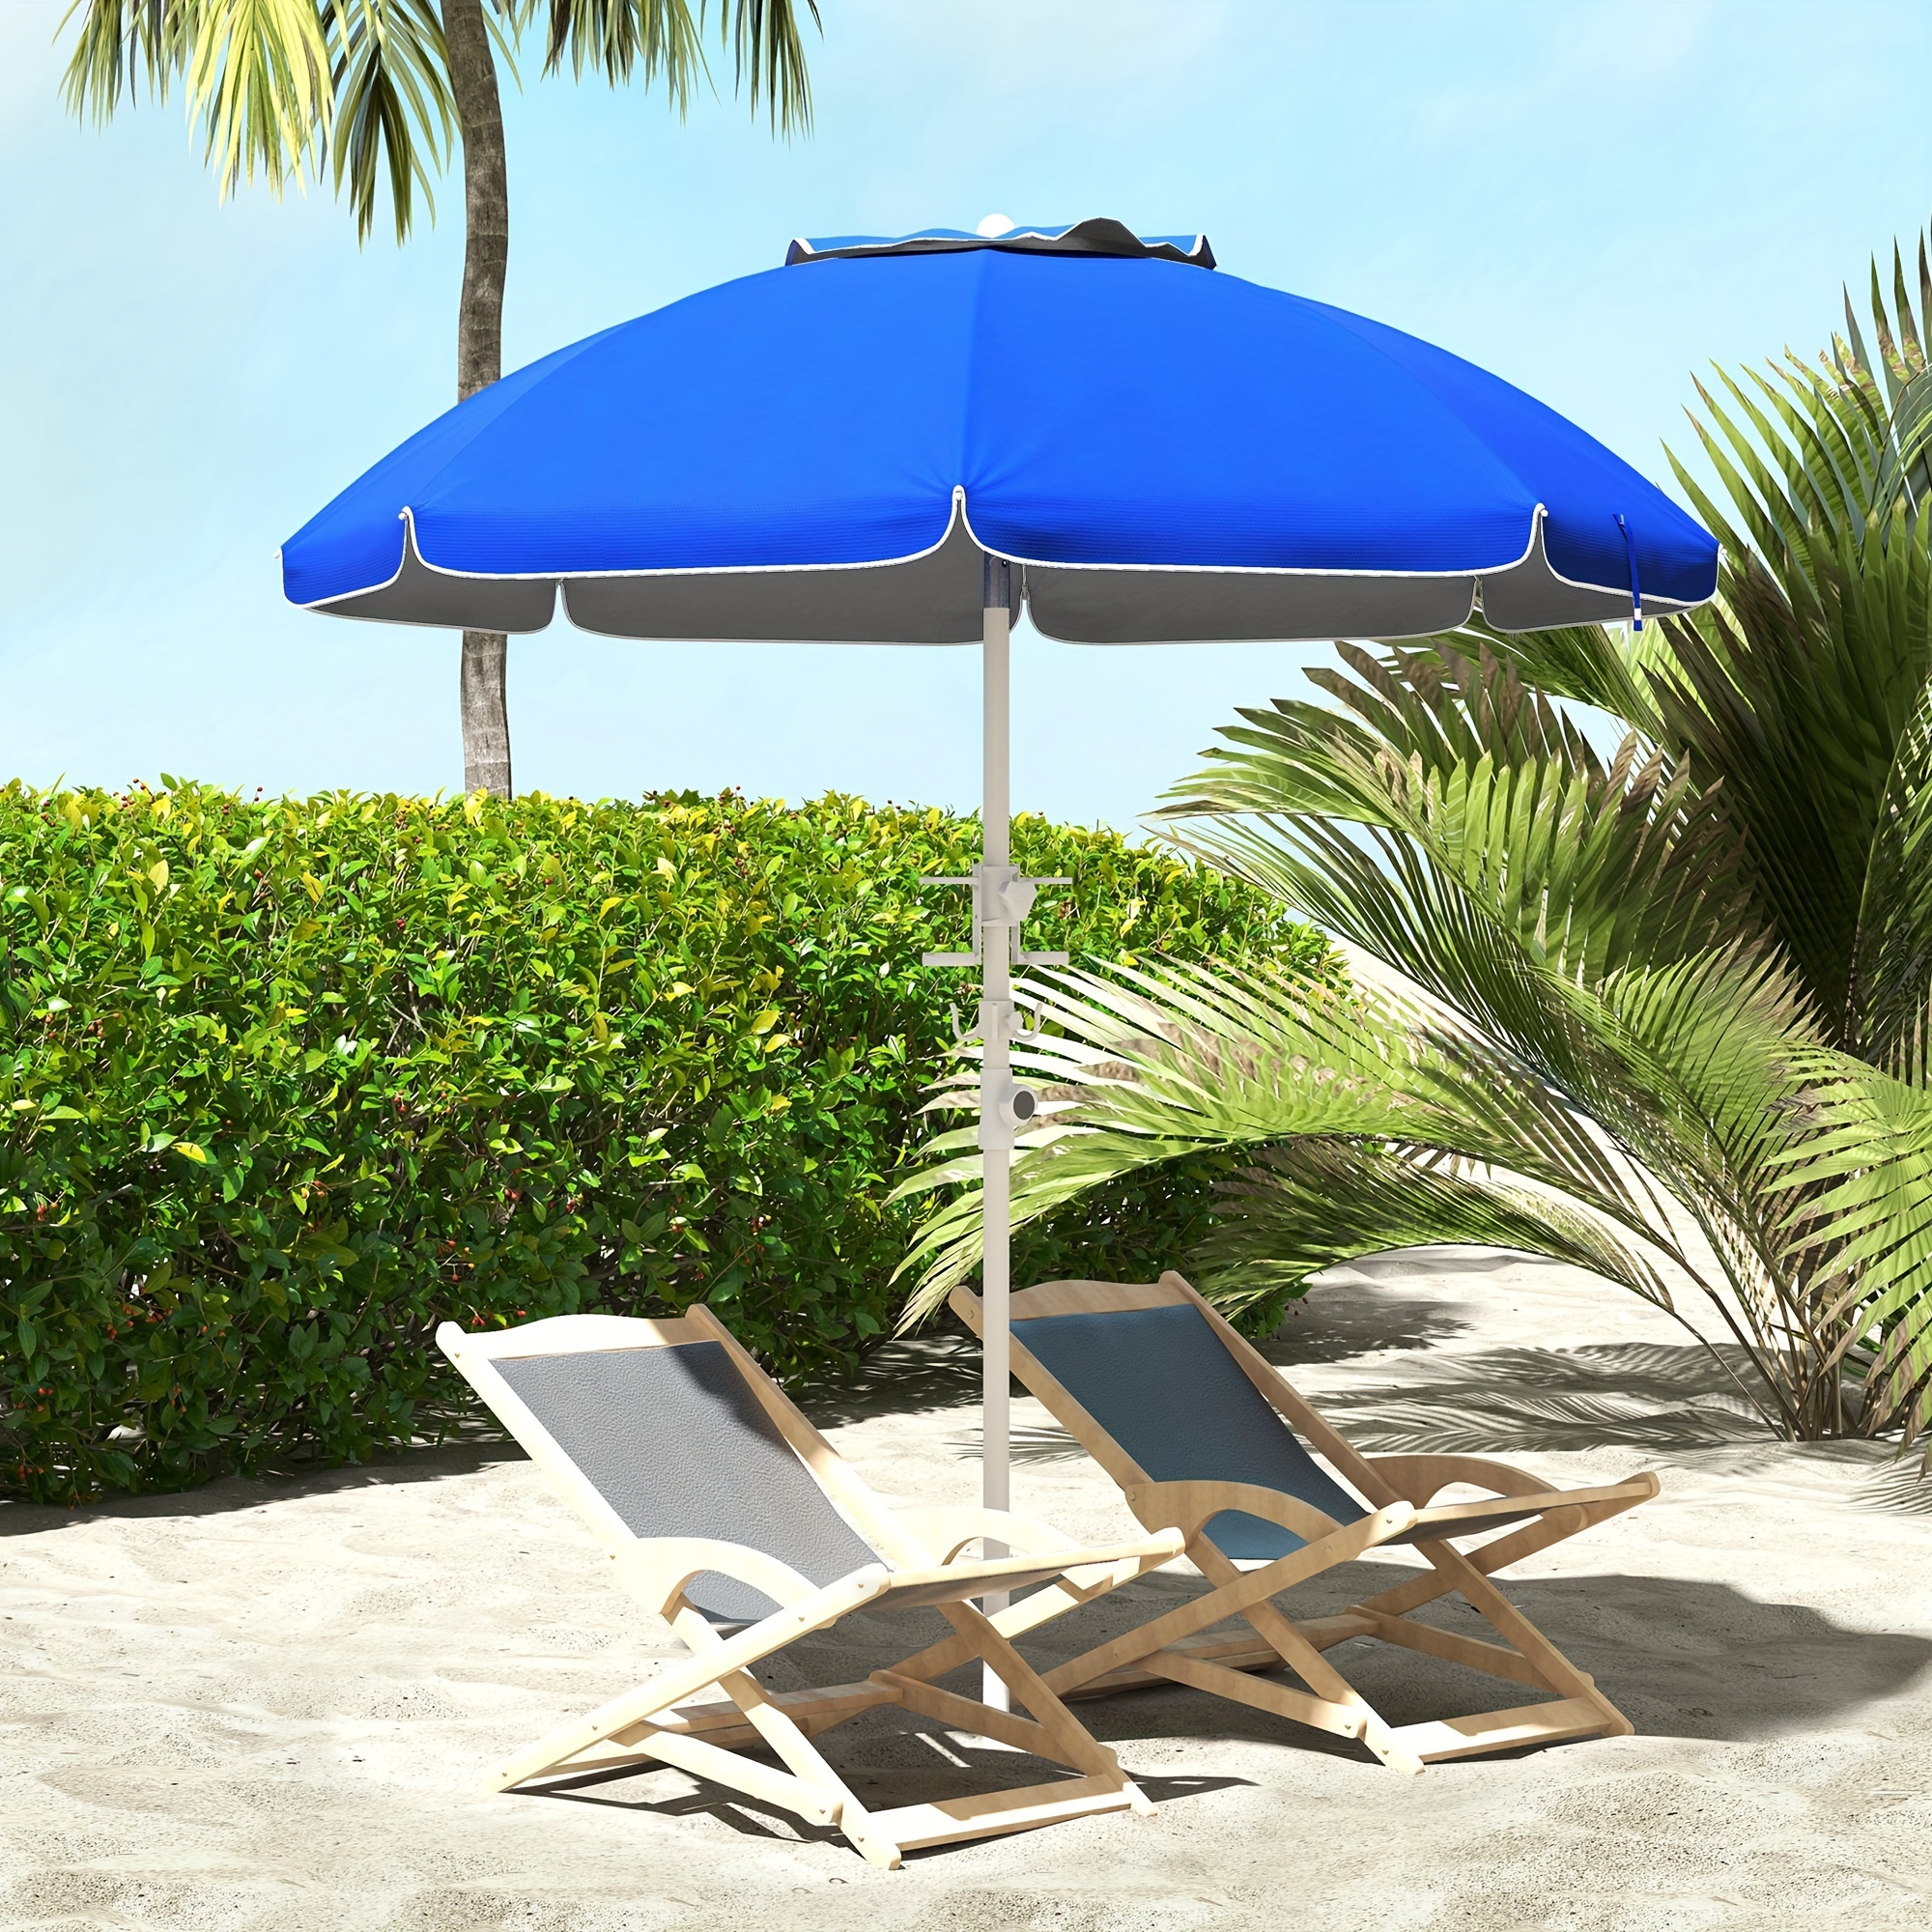 

Outsunny 5.7' Portable Beach Umbrella With Tilt, Adjustable Height, 2 Cup Holders & Hooks, Uv 40+ Outdoor Umbrella With Vented Canopy, Blue